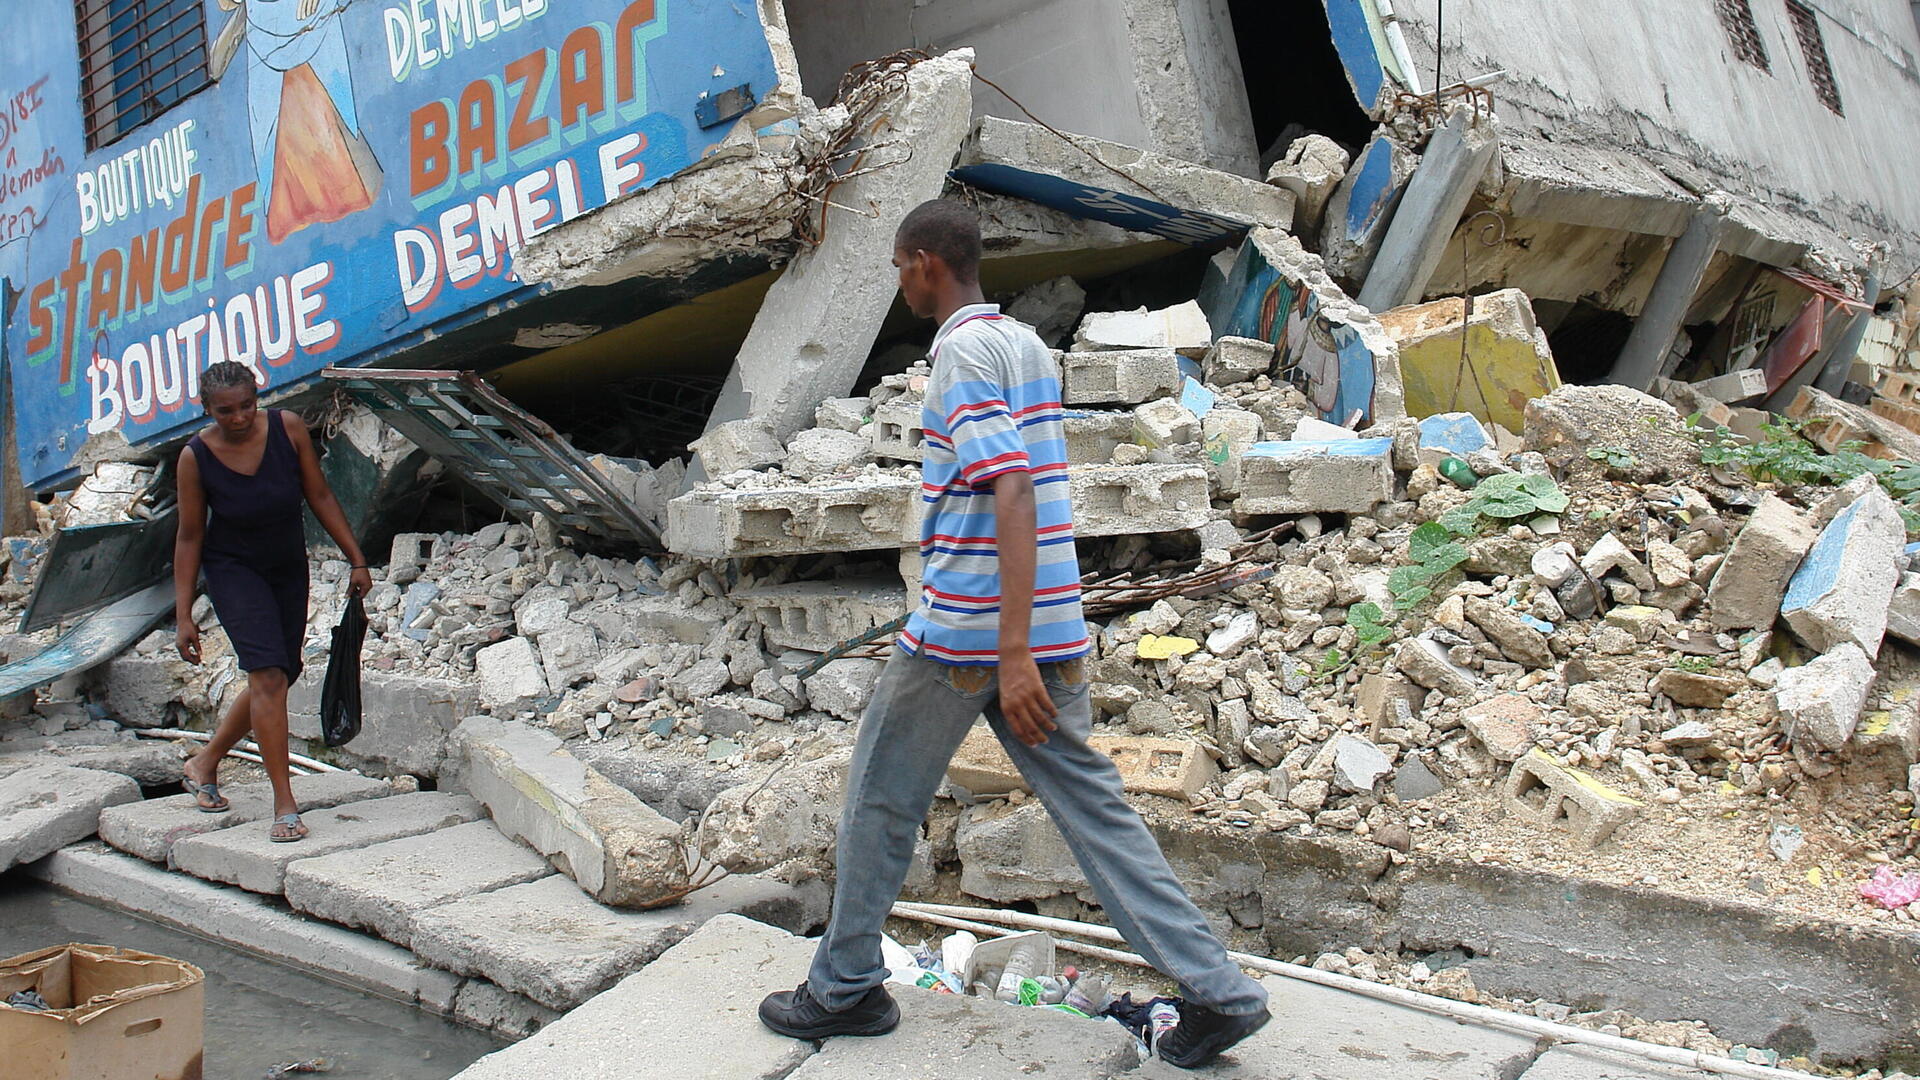 A man and woman walk gingerly past the rubble of buildings in Port-au-Prince, Haiti destroyed by the powerful 2010 earthquake. 